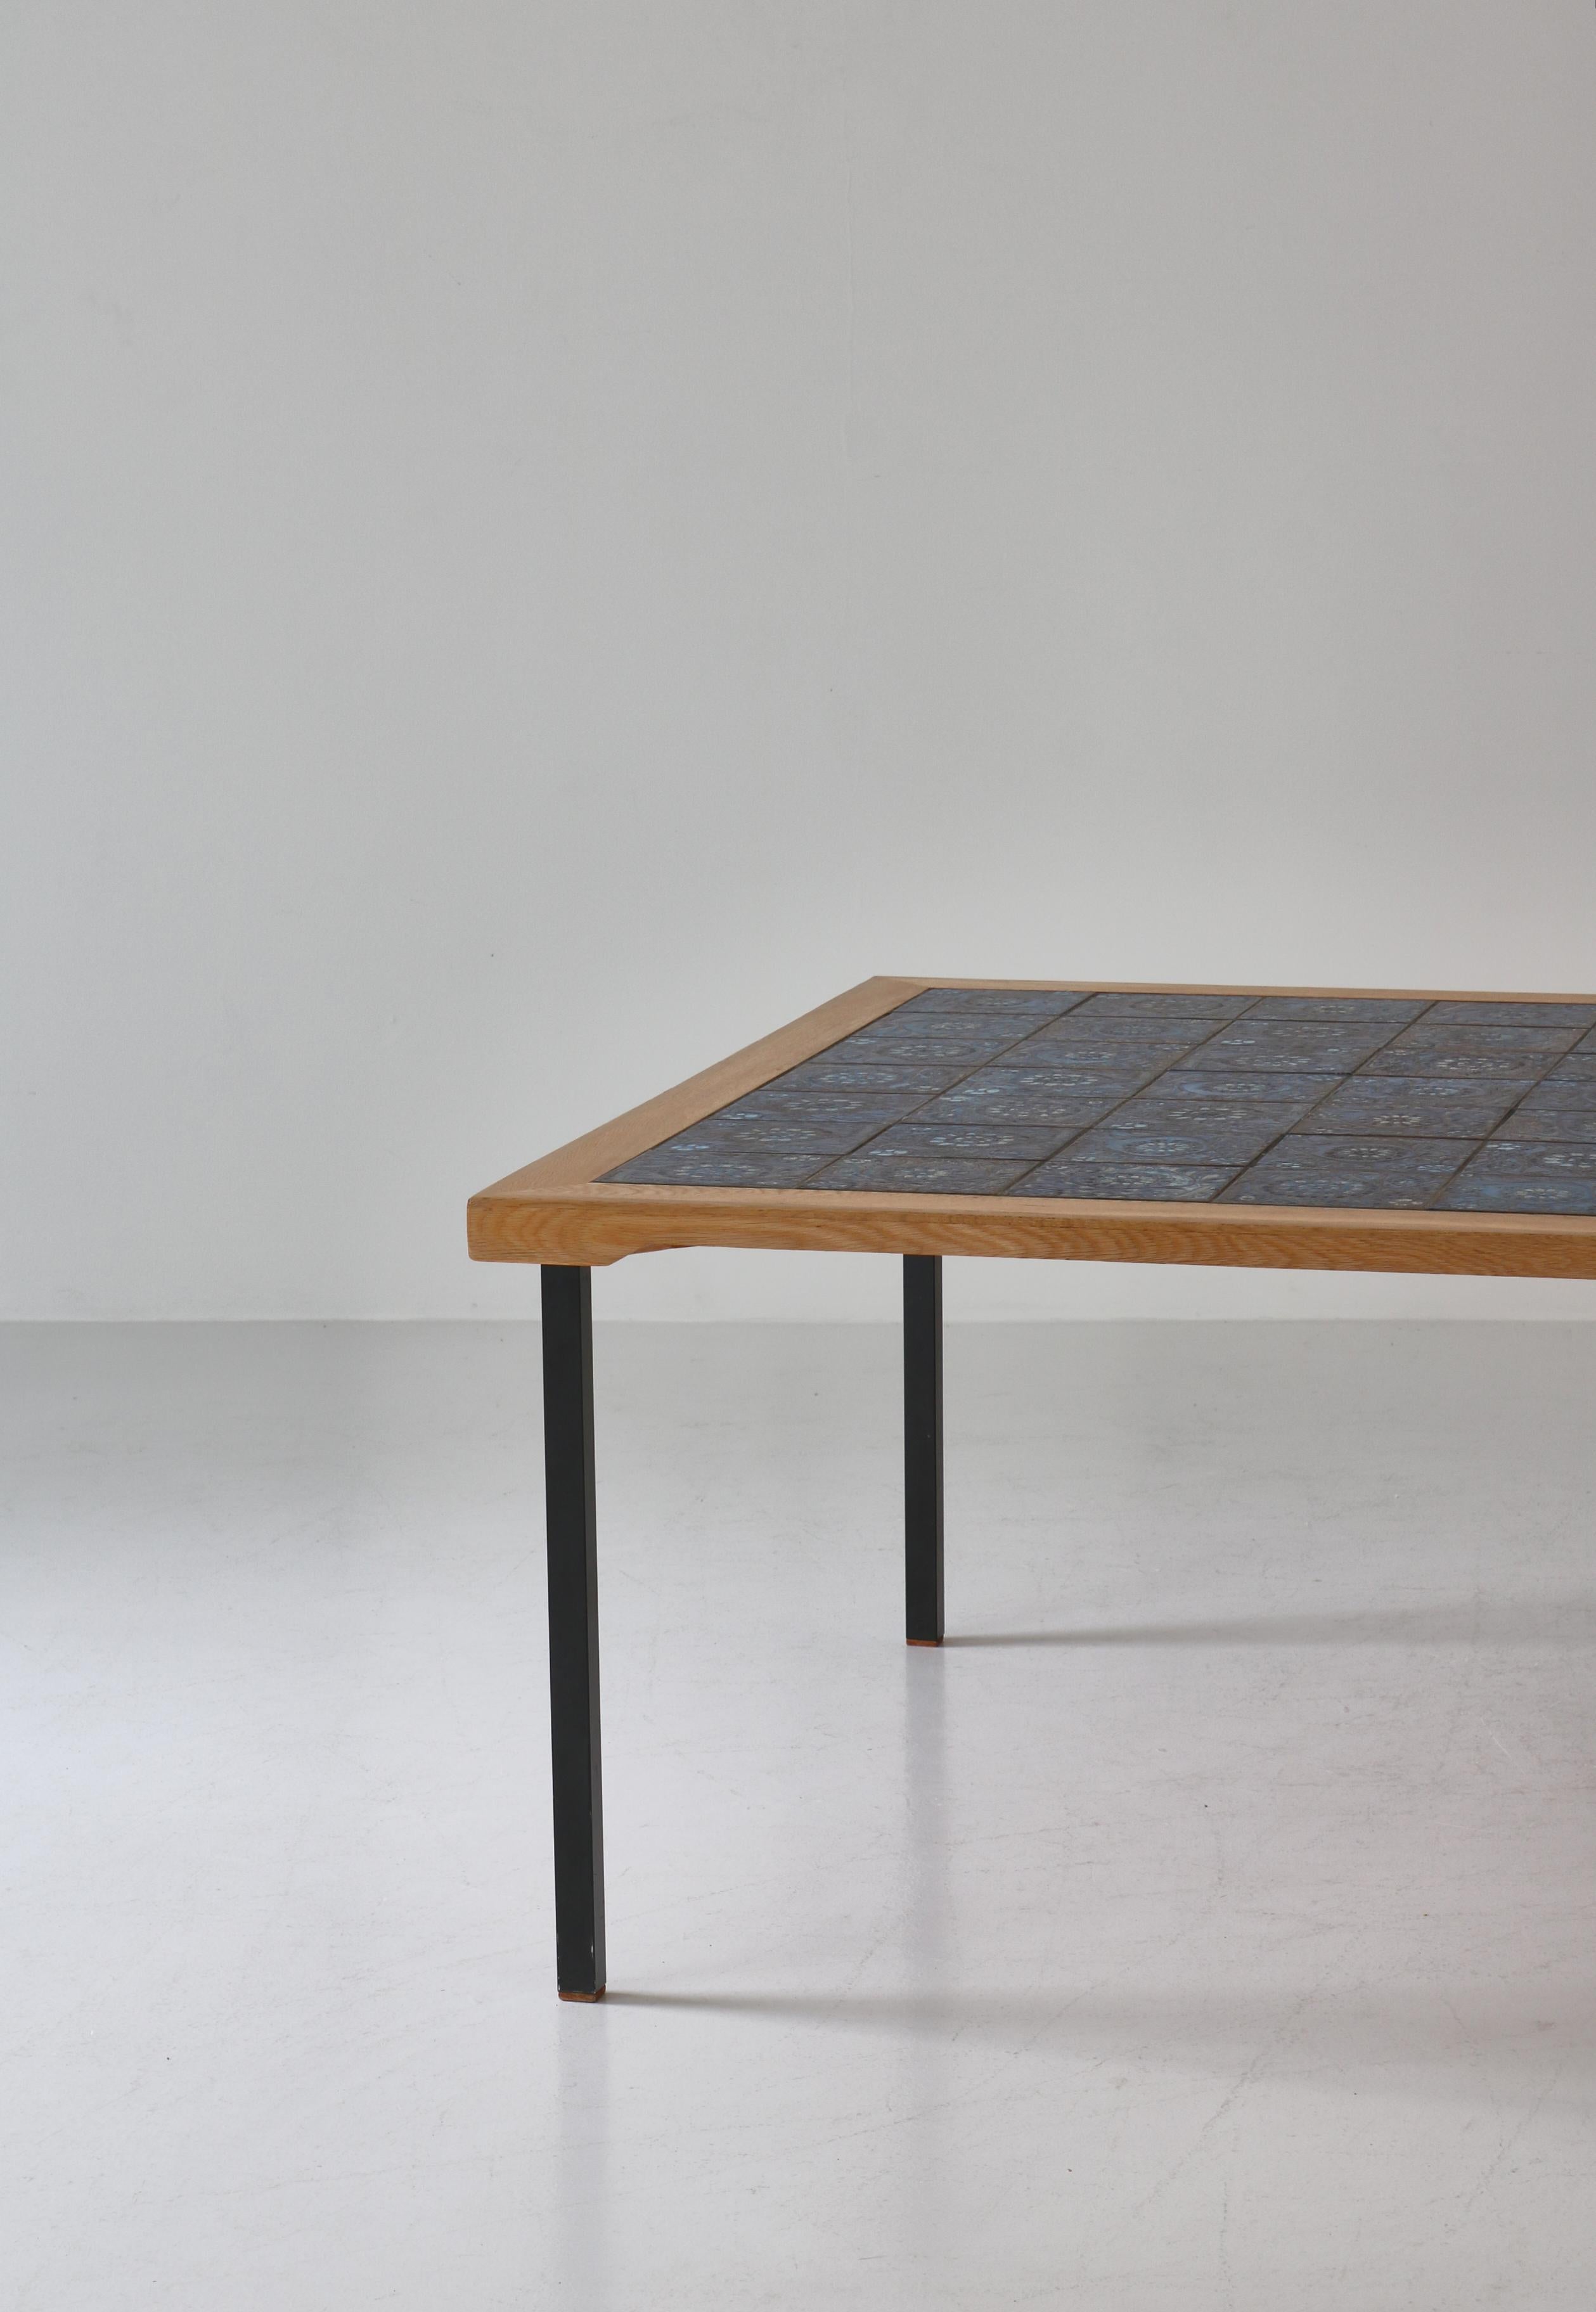 Mid-20th Century Scandianvian Modern Square Table in Oak Wood with Blue Ceramic Tiles, 1960s